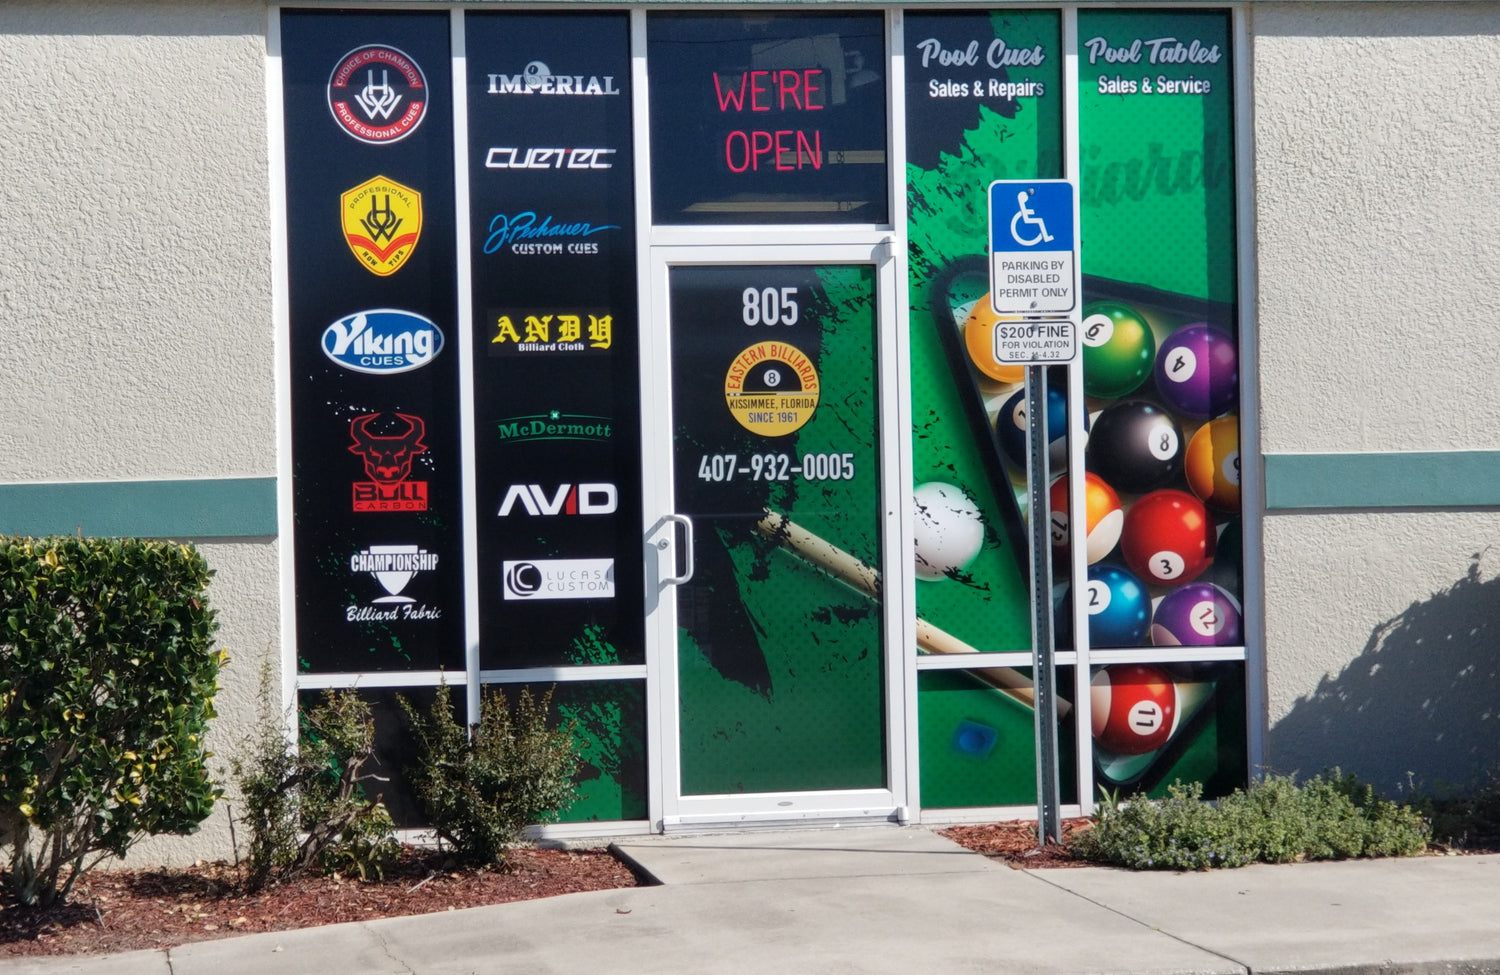 Eastern Billiards Storefront in Kissimmee Florida